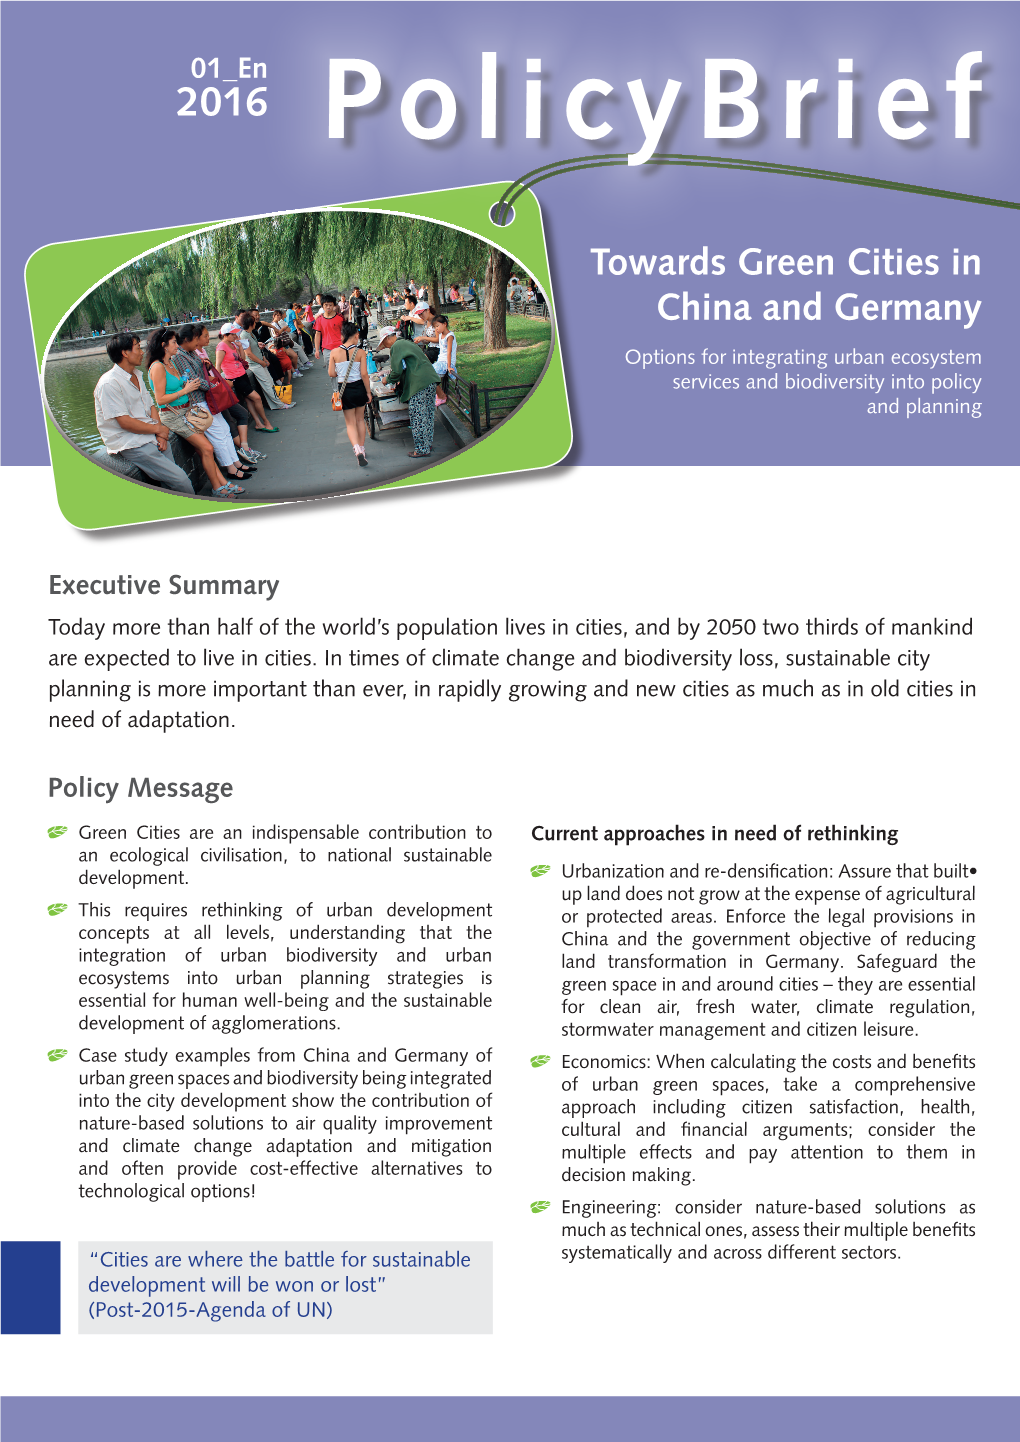 Policybrief: Towards Green Cities in China and Germany